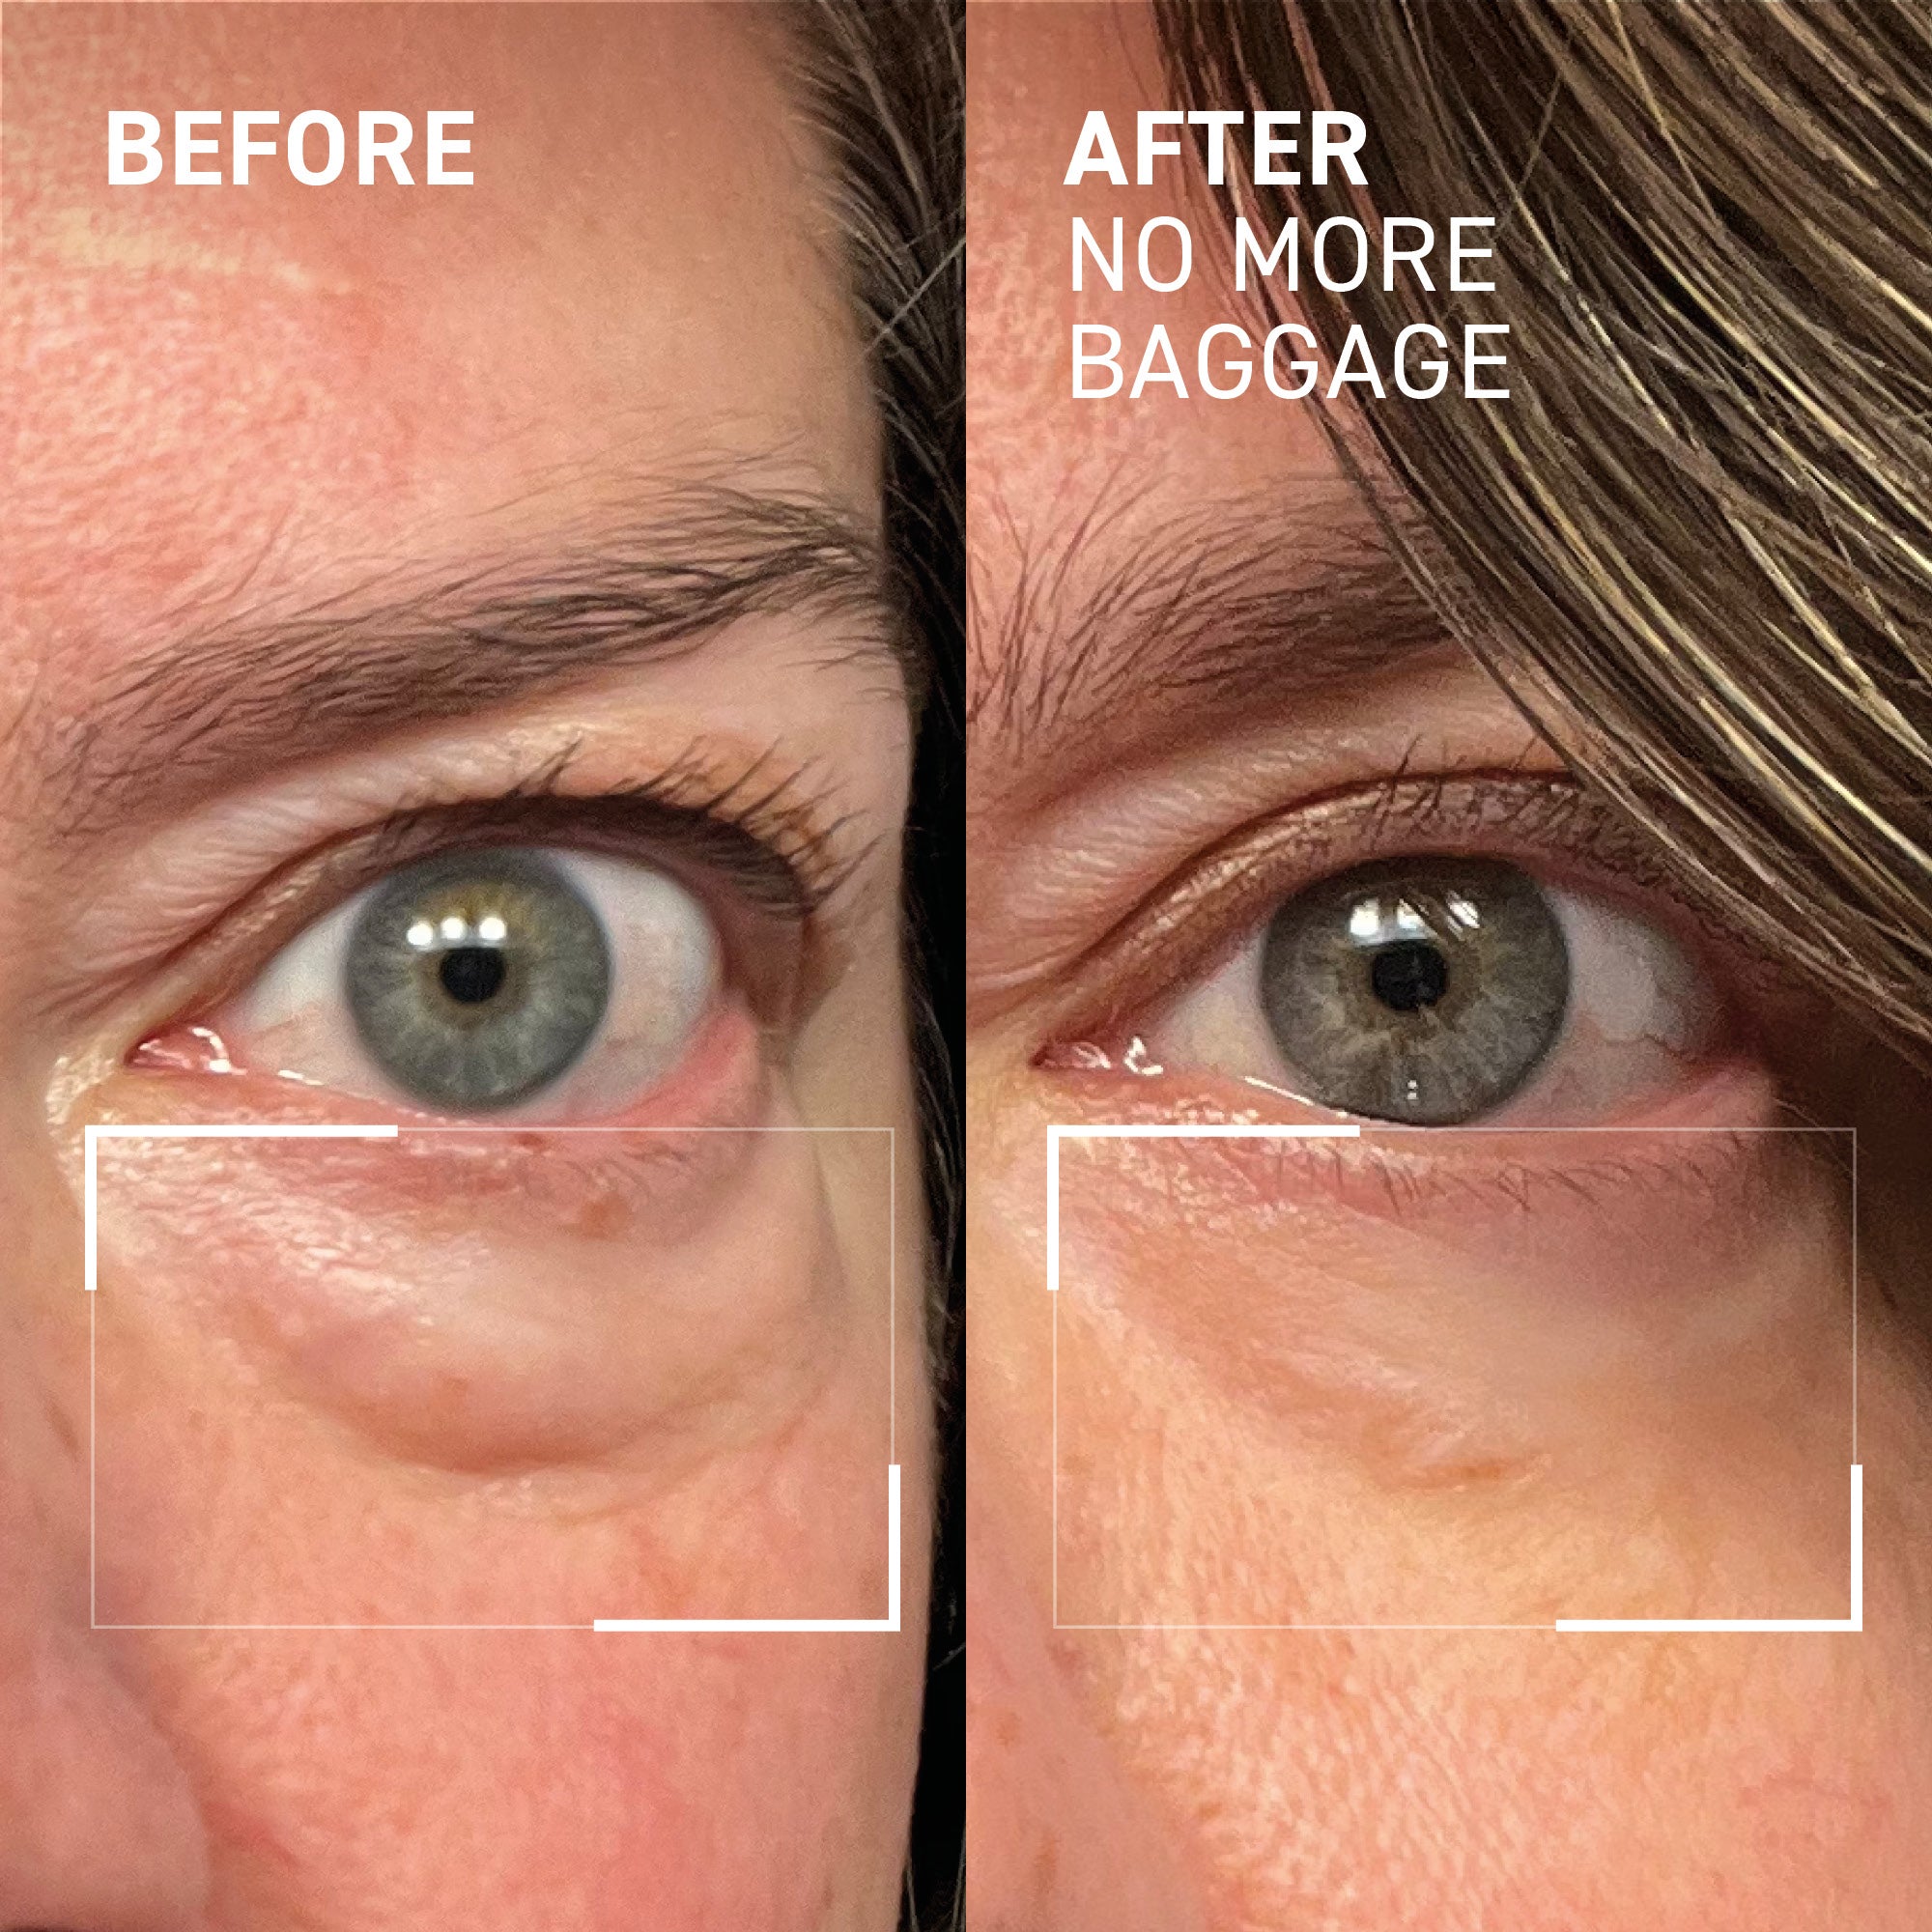 Anti-Puffiness Eye Gel - Dr. Brandt Needles No More No More